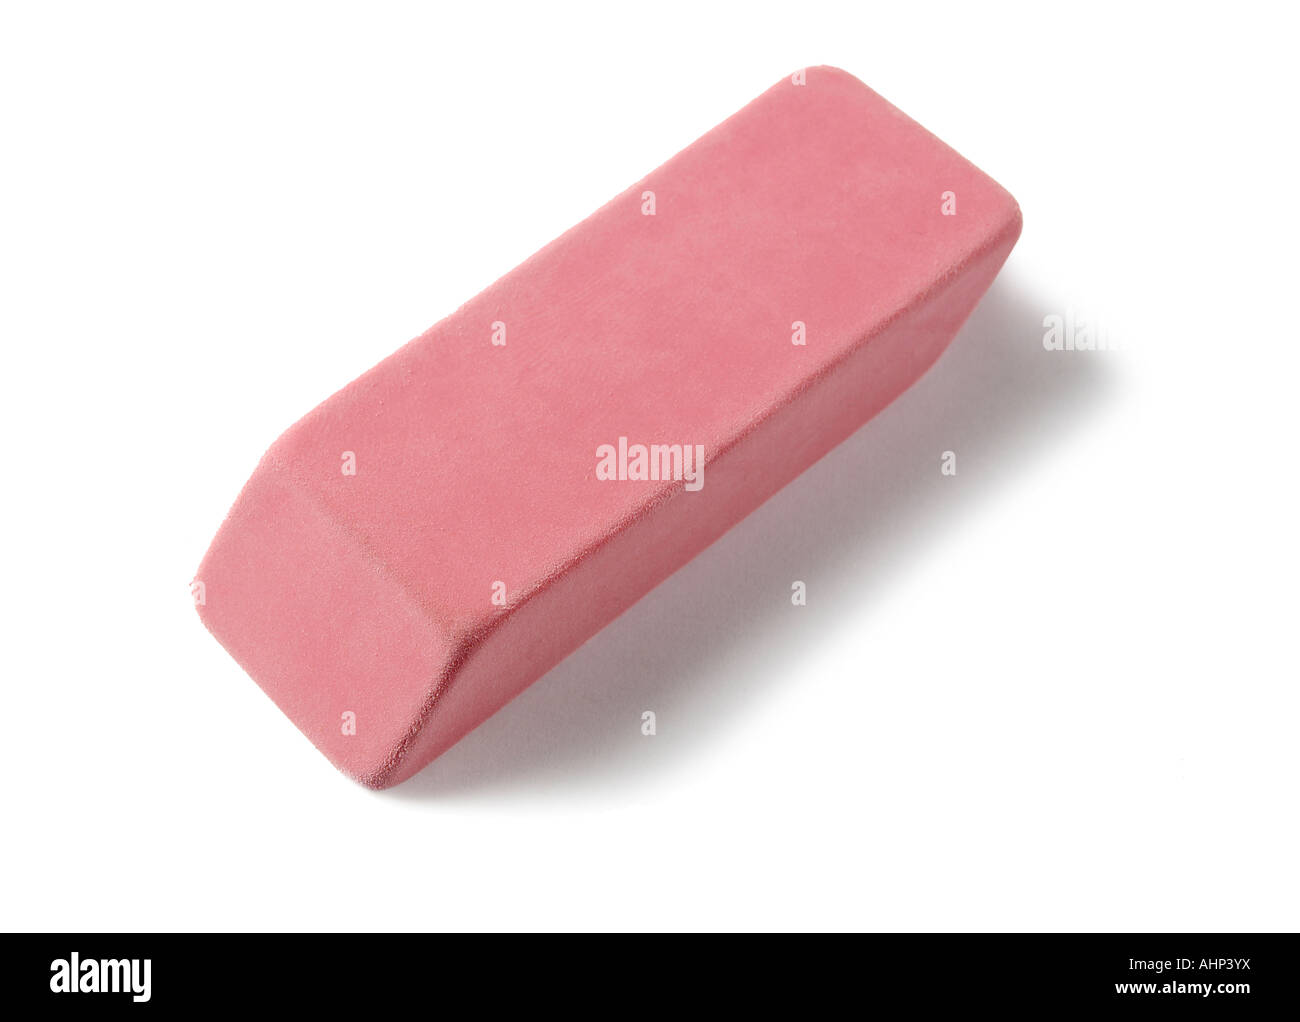 Eraser elevated view Stock Photo